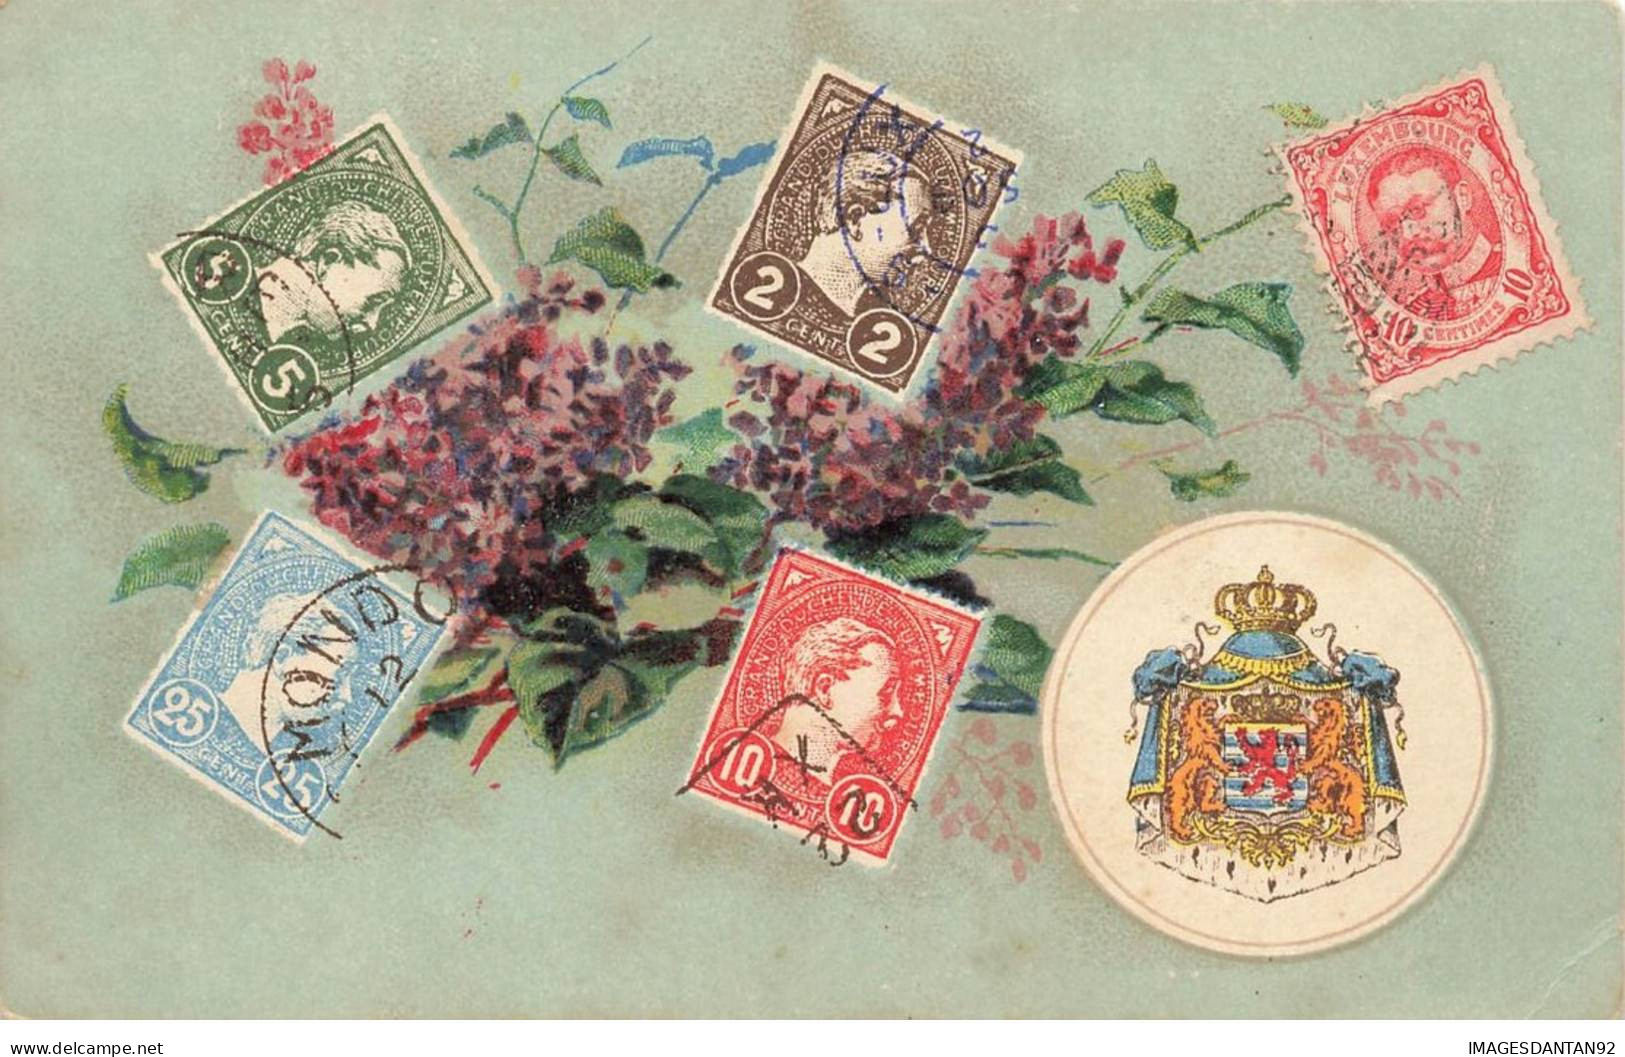 LUXEMBOURG LUXEMBURG #27091 TIMBRES FLEURS ARMOIRIES BLASON REPRESENTATION TIMBRES - Stamps (pictures)